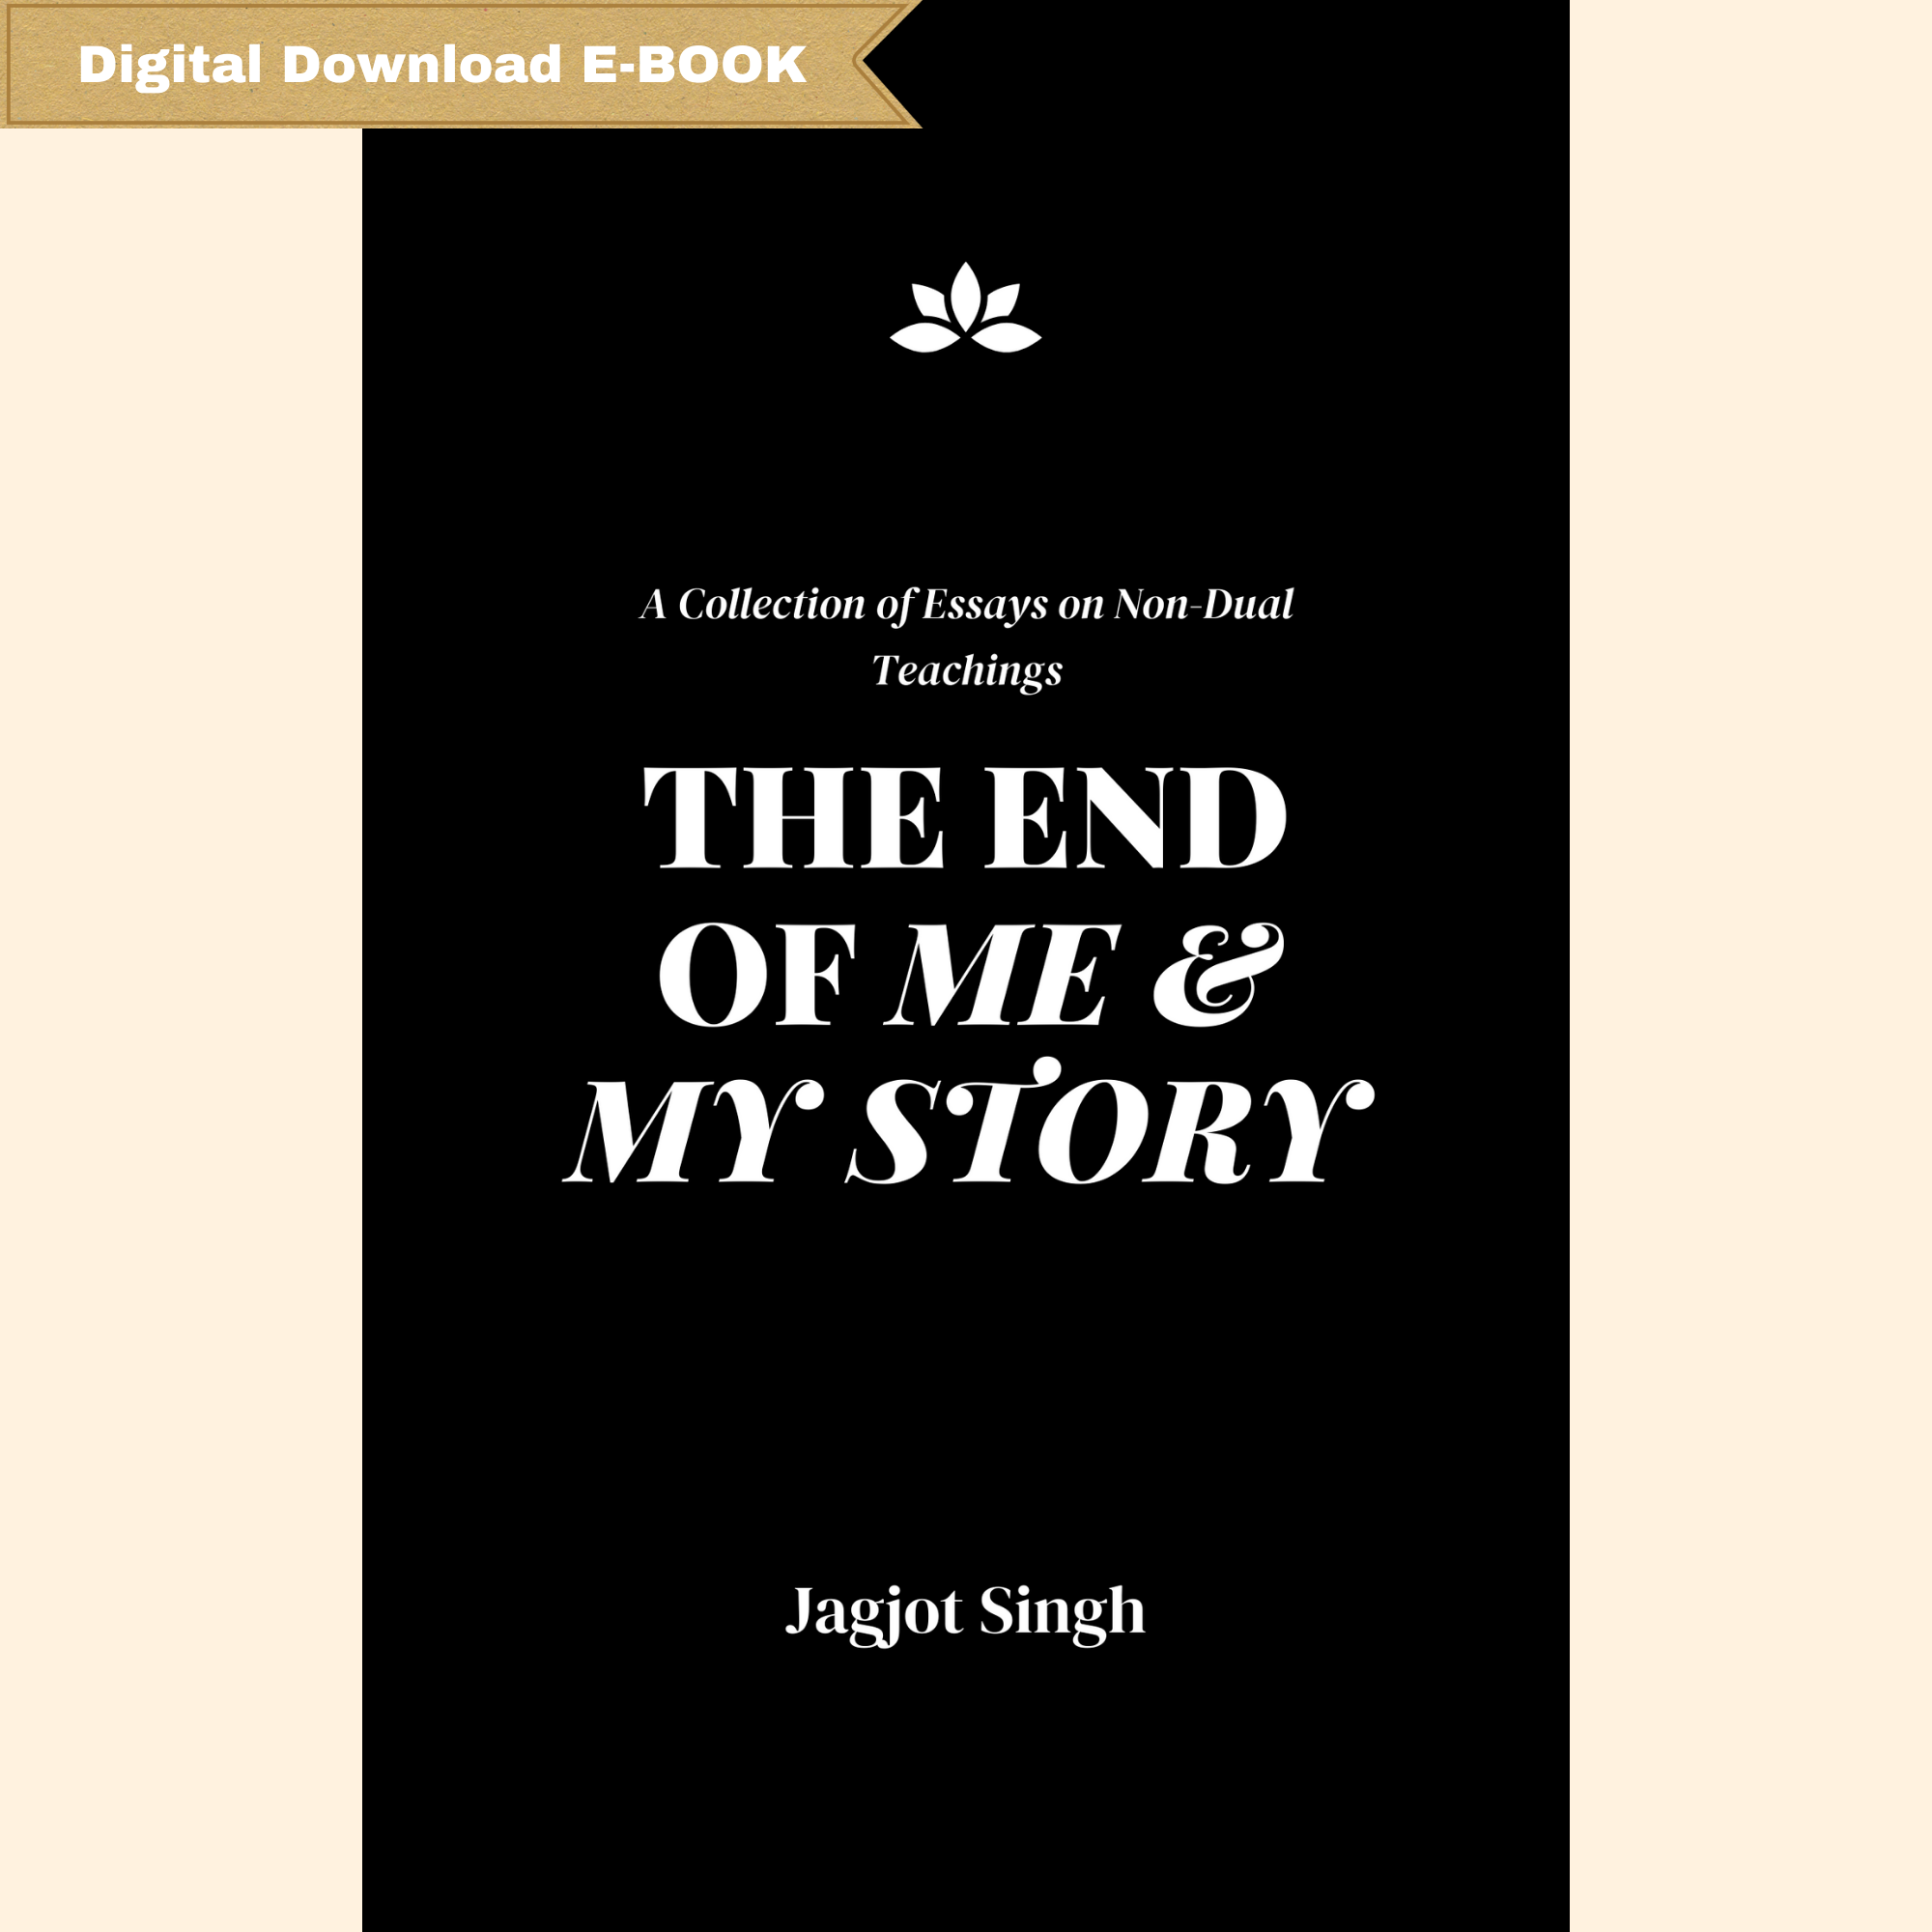 the_end_of_me_and_my_story_ebook